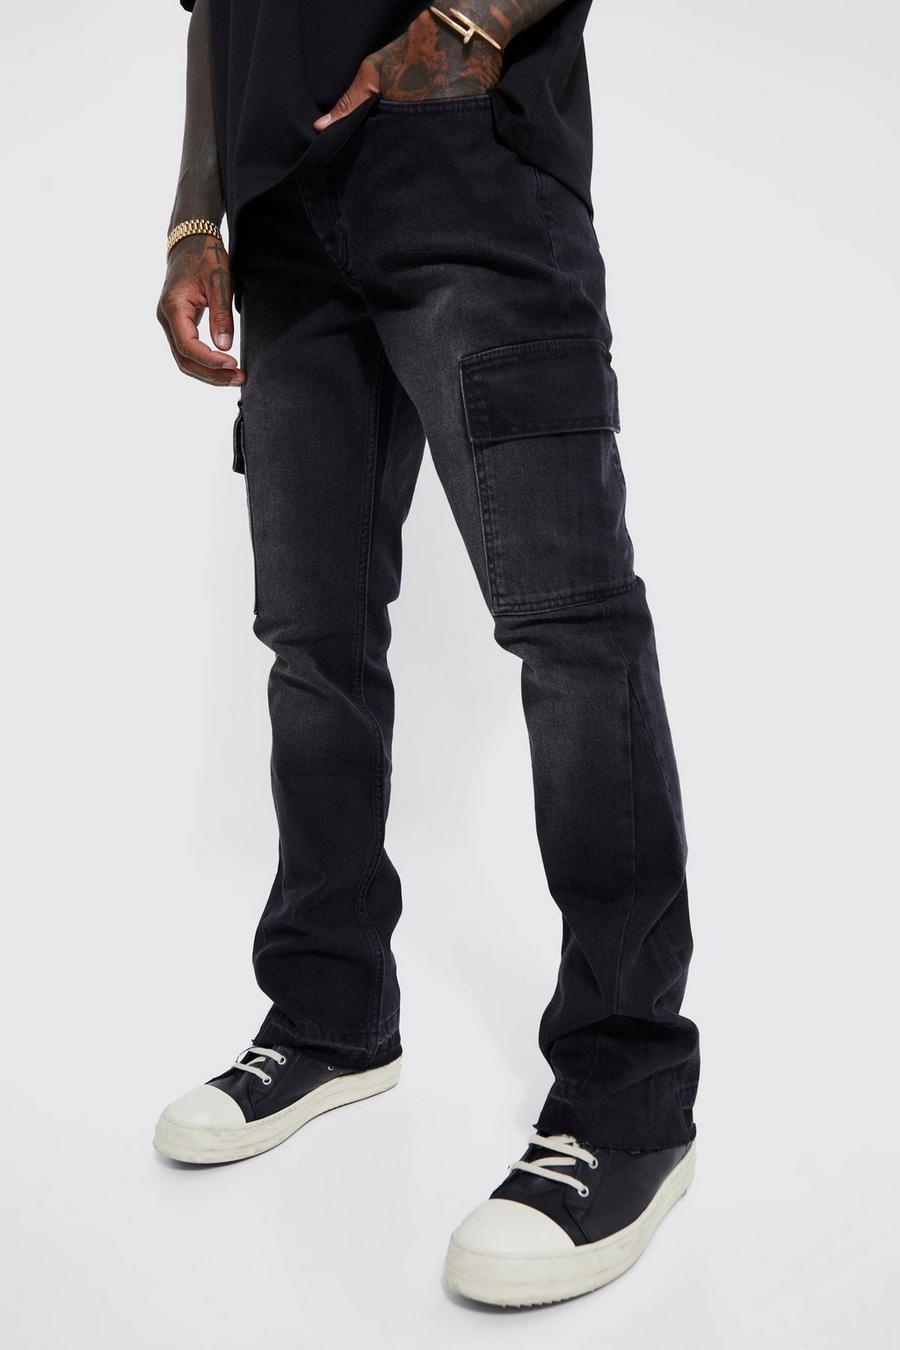 New Look slim rigid jeans in washed black